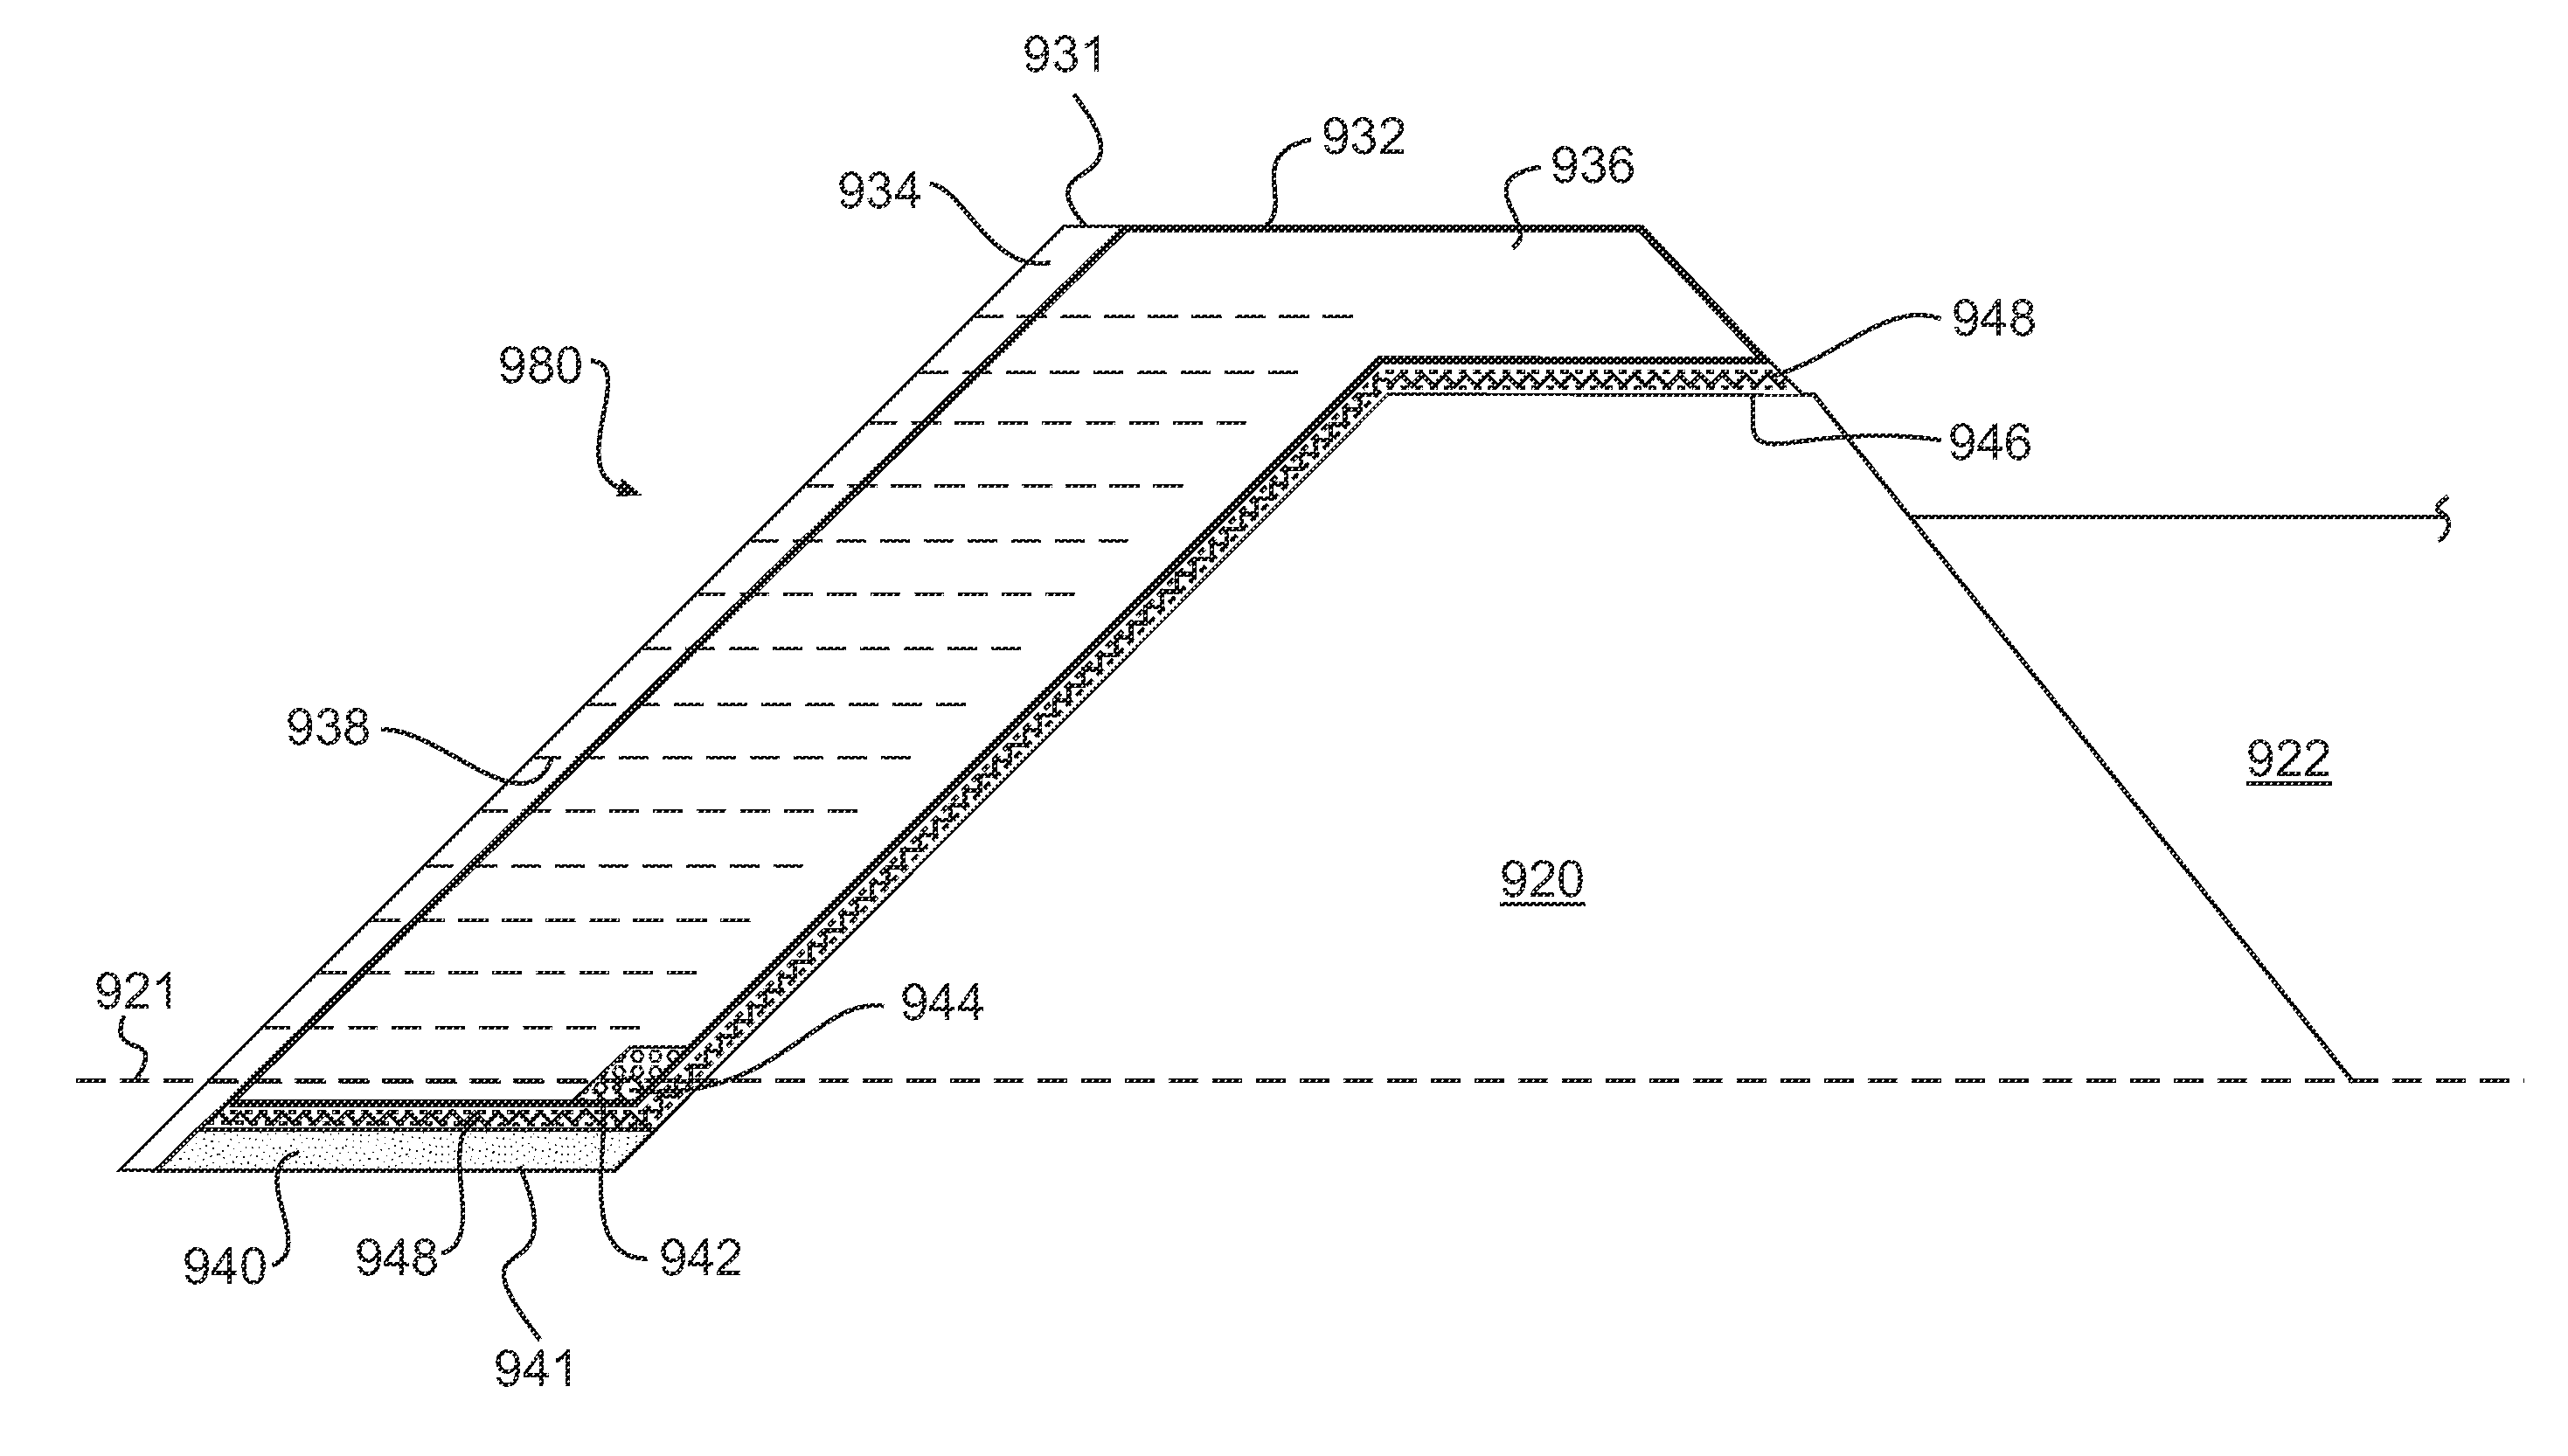 System and method for strengthening a sloped structure such as a berm, basin, levee, embankment, or the like